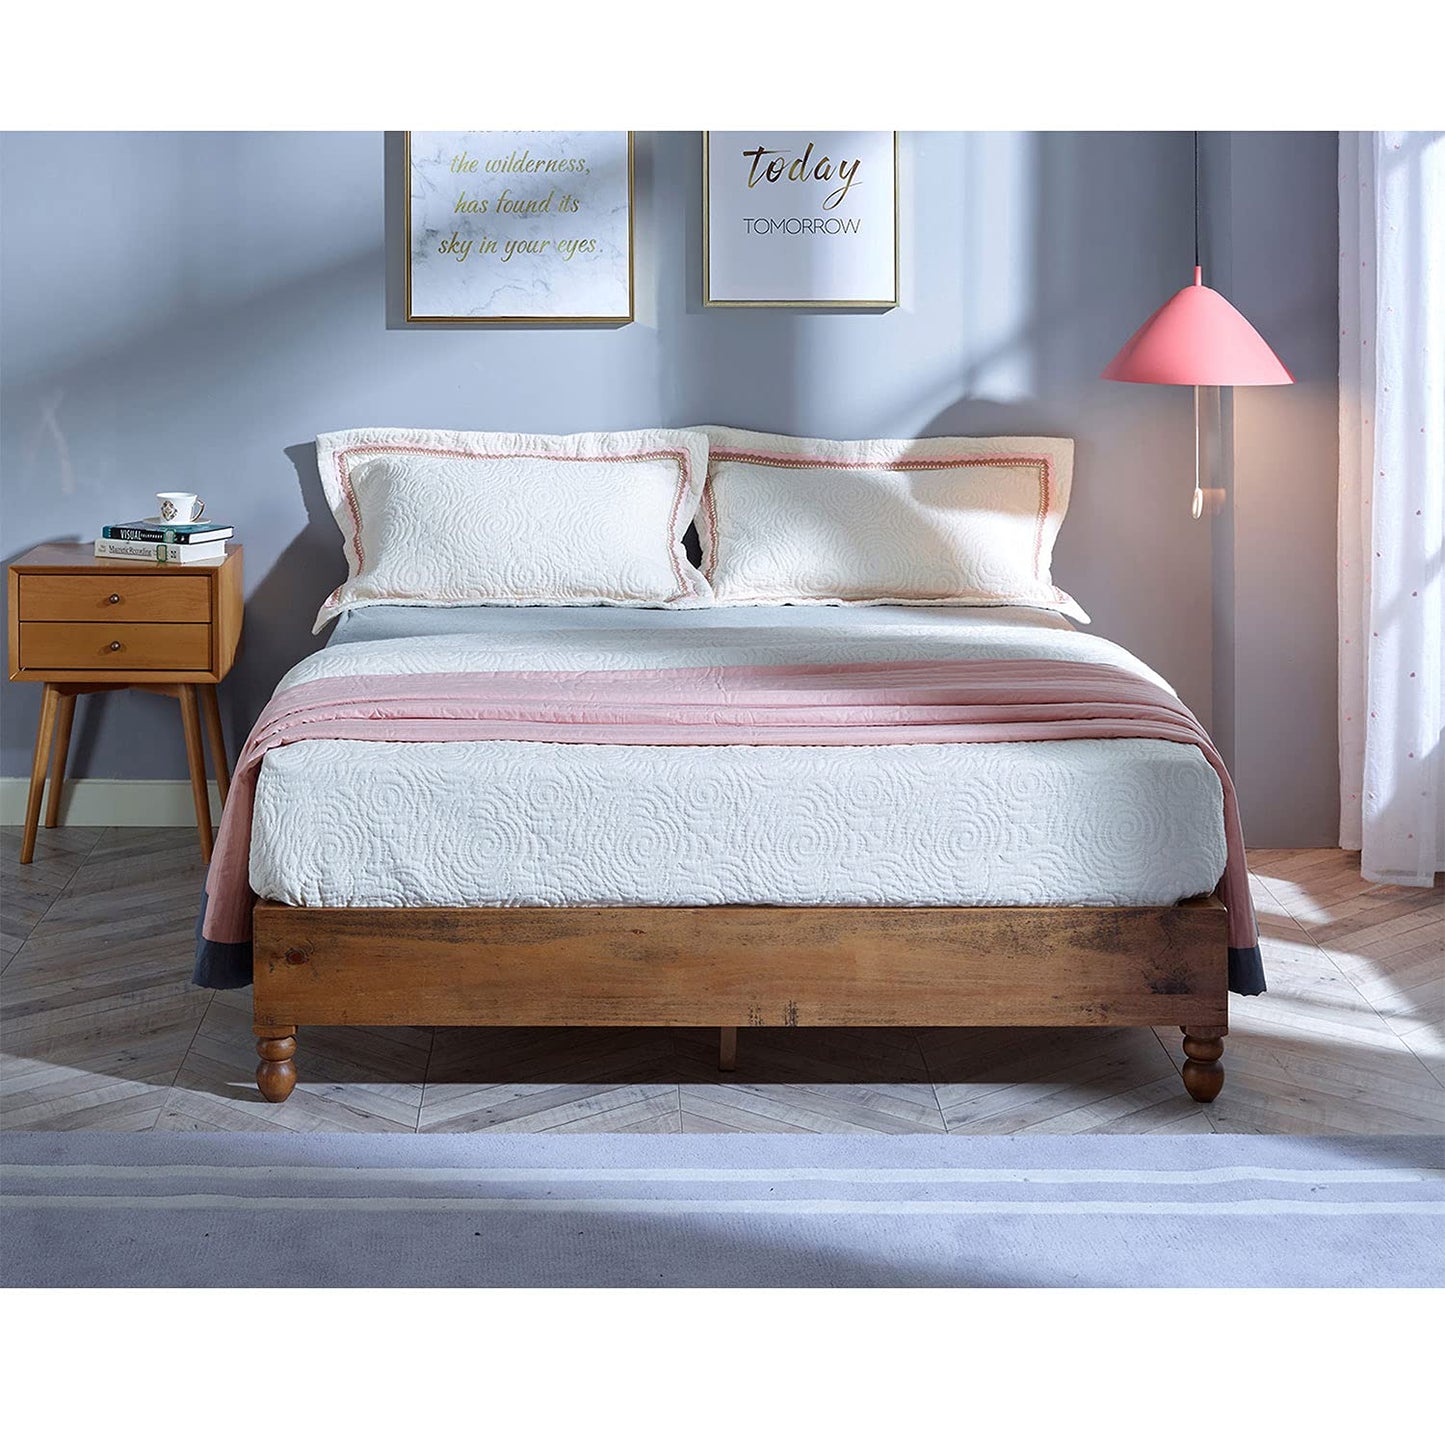 MUSEHOMEINC 12 Inch Solid Wood Bed Frame Rustic Style Eliminates The Need for a Boxspring, Natural Finish, King